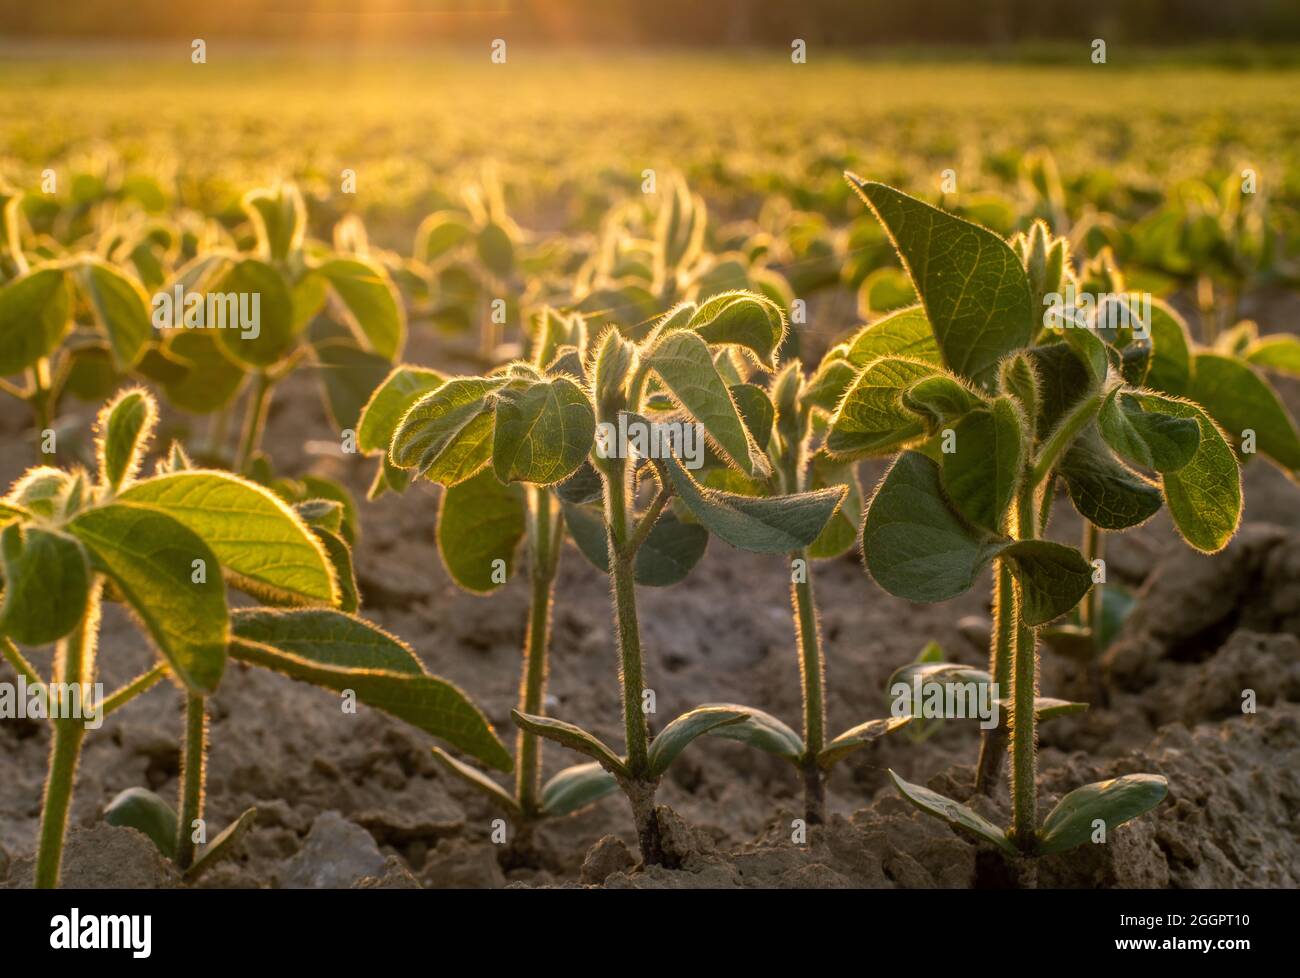 Young soy plants, growing in field, backlit by early morning light Stock Photo